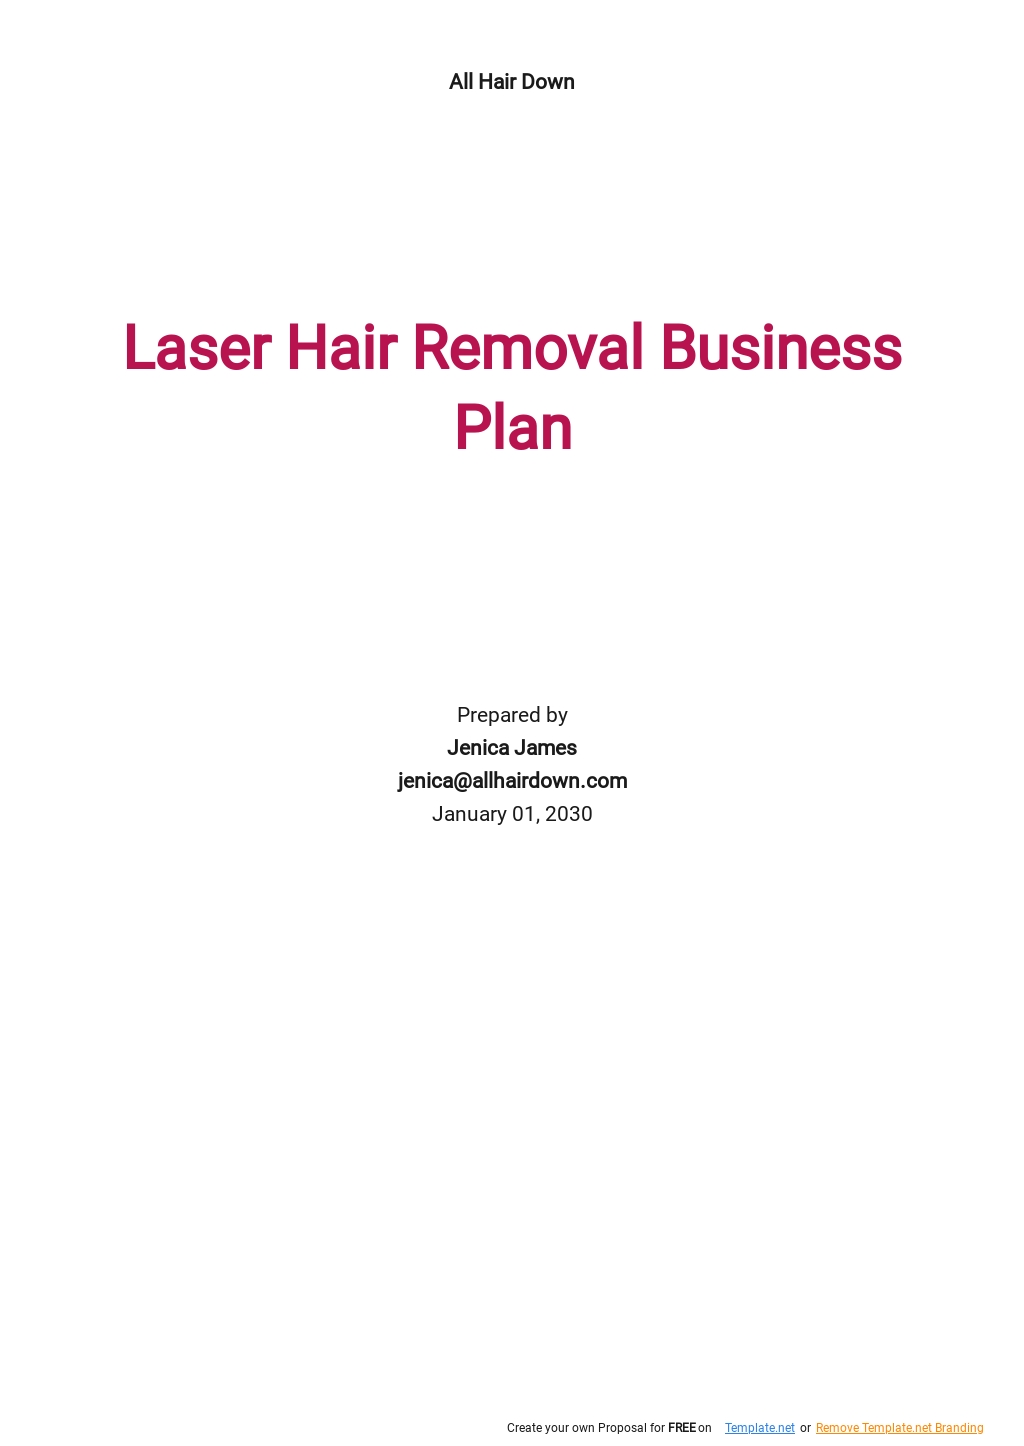 Hair Removal Business Plan Template.jpe